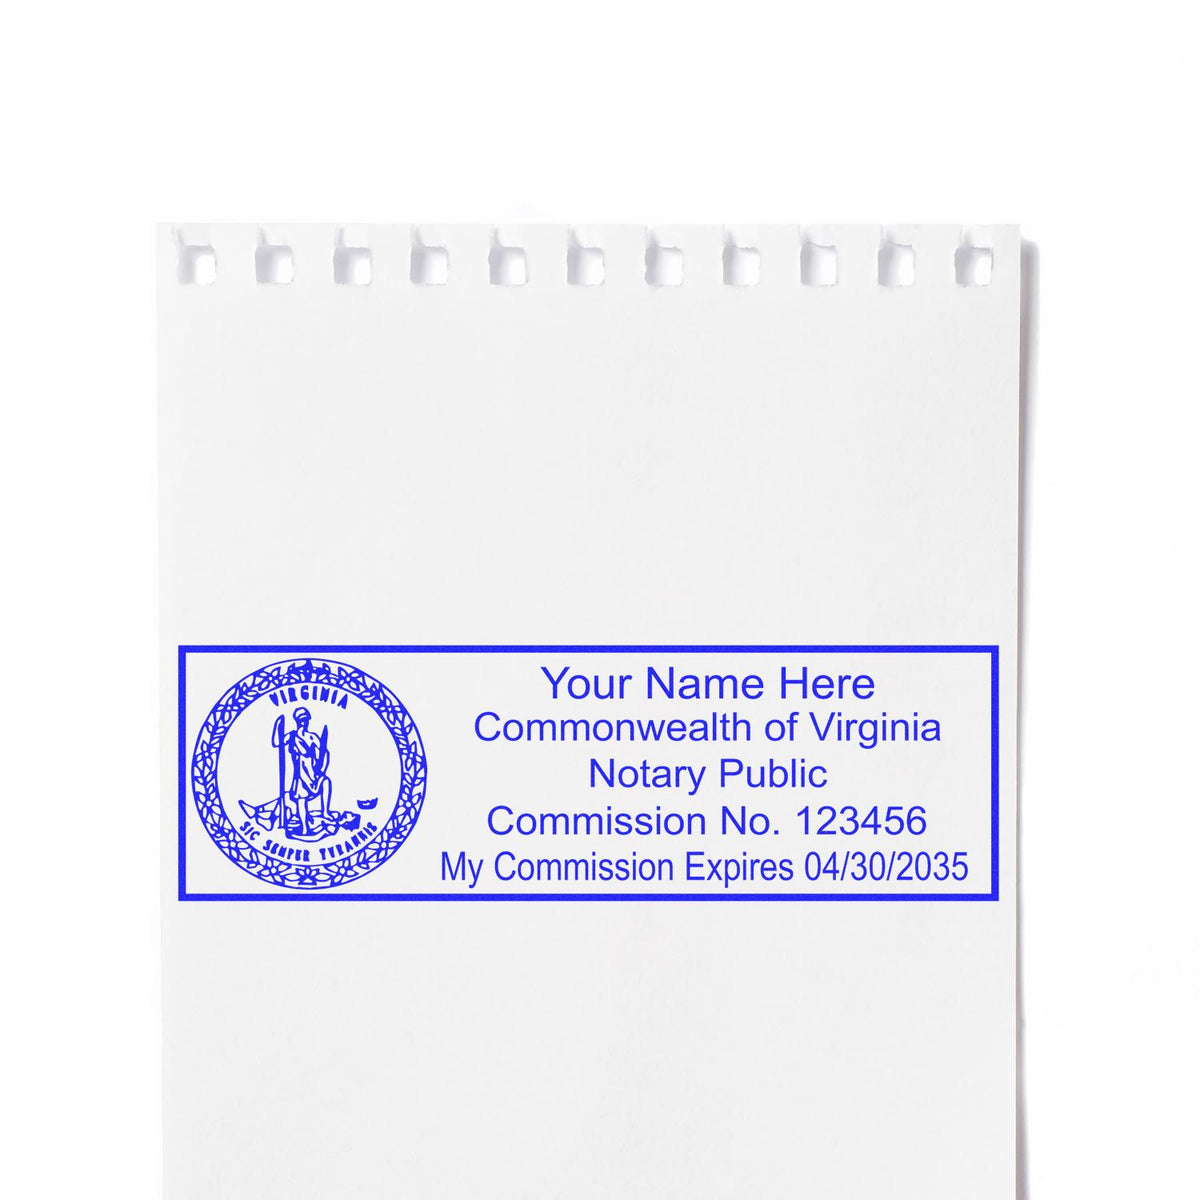 The MaxLight Premium Pre-Inked Virginia State Seal Notarial Stamp stamp impression comes to life with a crisp, detailed photo on paper - showcasing true professional quality.